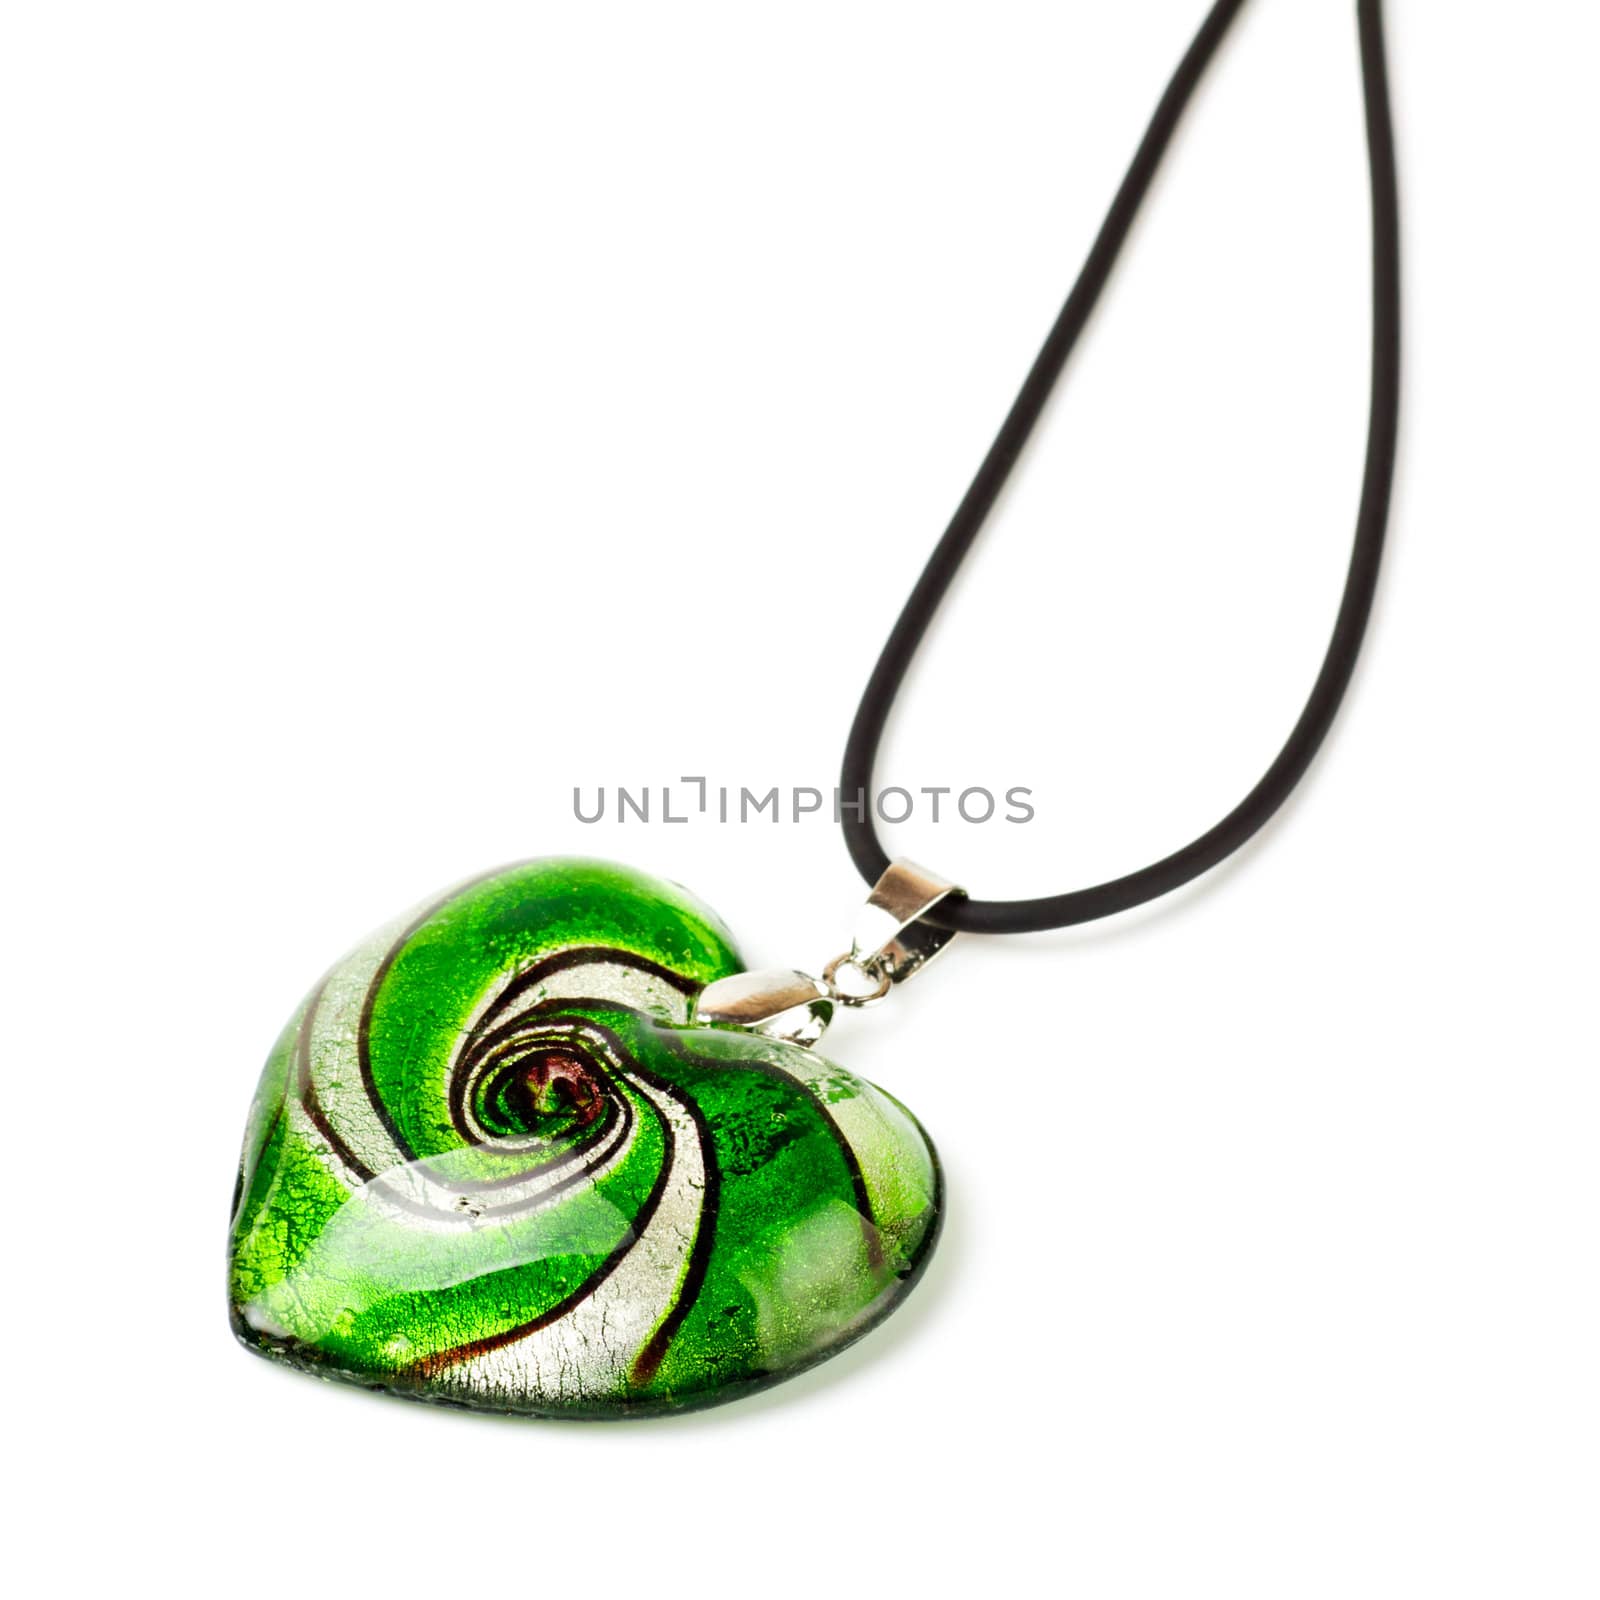 green heart-shaped pendant isolated on white background